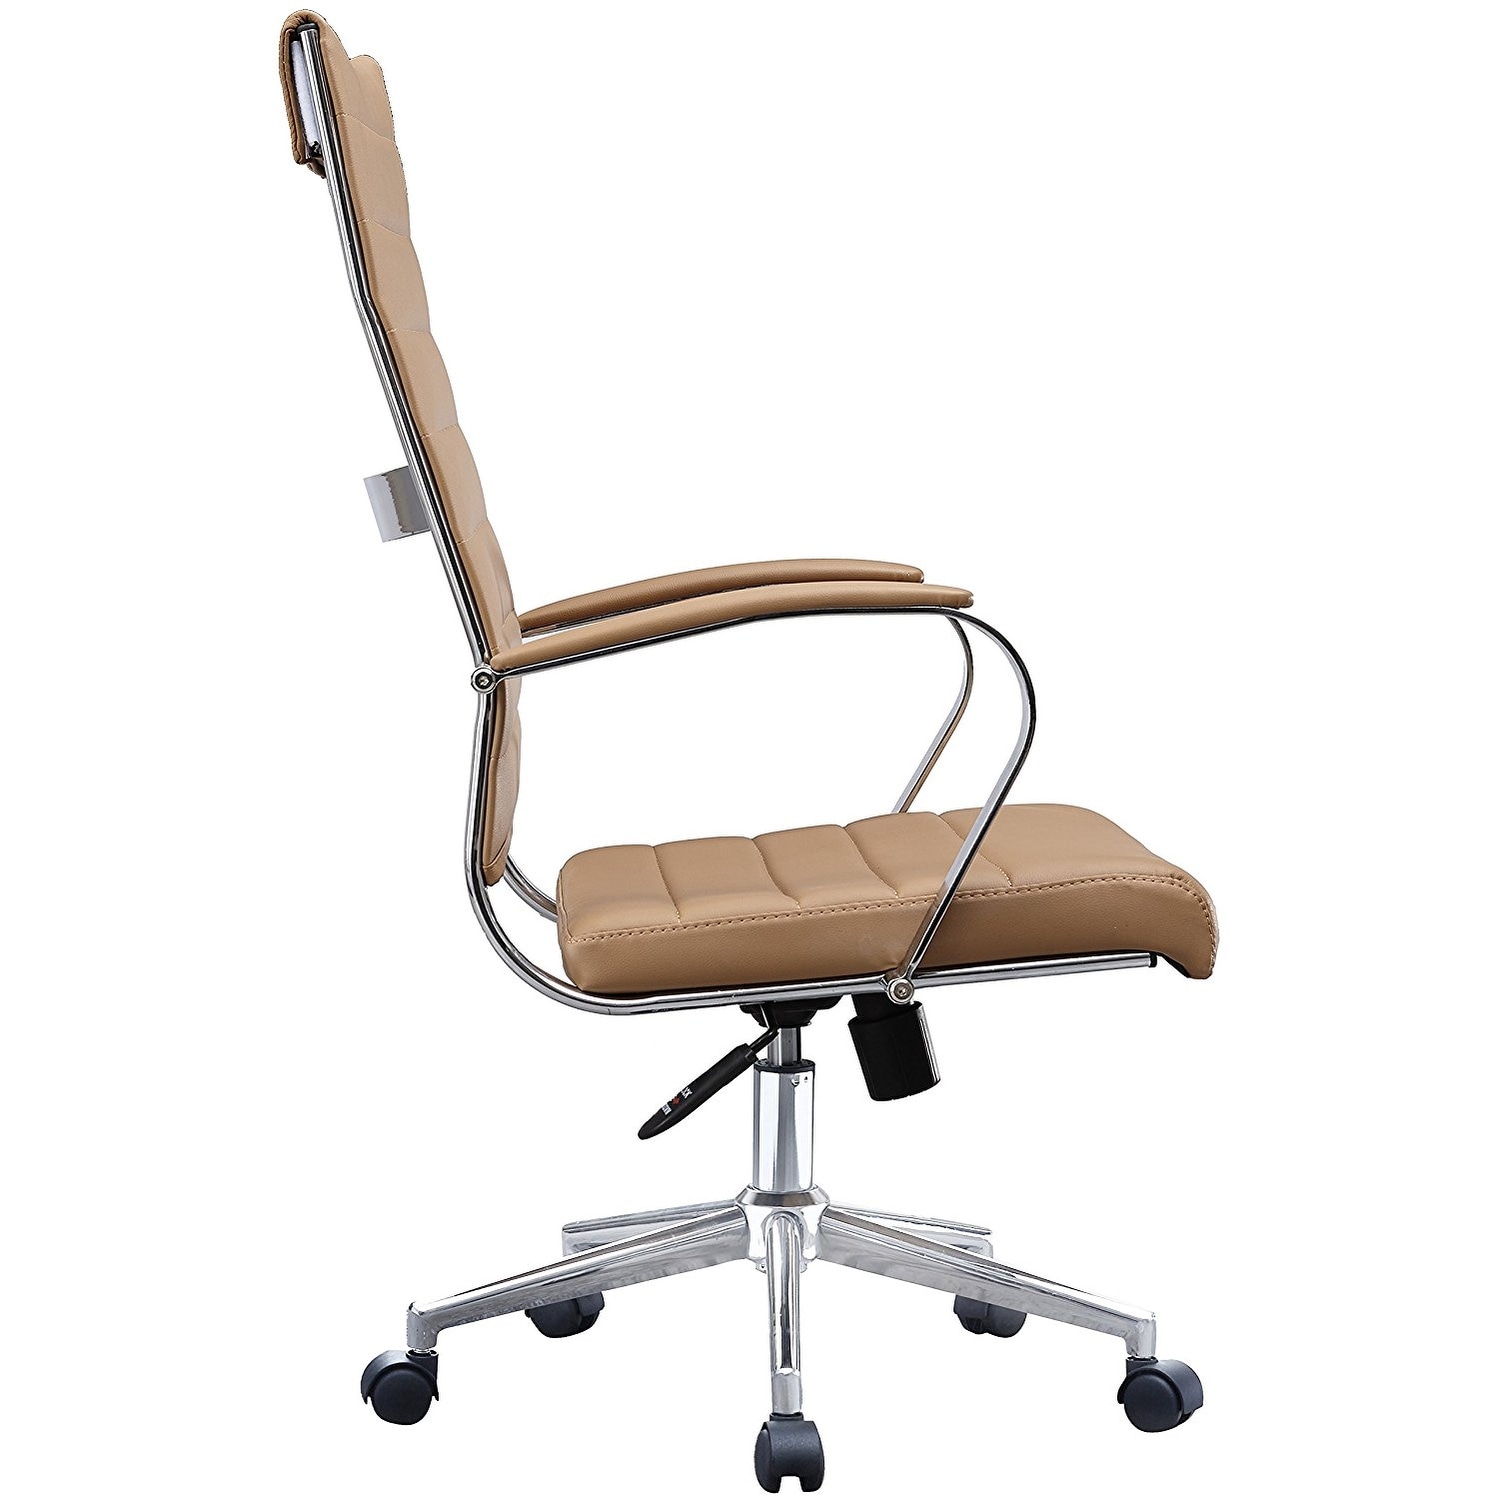 https://ak1.ostkcdn.com/images/products/is/images/direct/f7095d0aadf71d6642749584875faca07882591b/2xhome---Tan---Modern-High-Back-Ribbed-Office-Chair-PU-Leather-Swivel-Tilt-Adjustable-Cushion-Chair-Designer-Boss-Executive.jpg